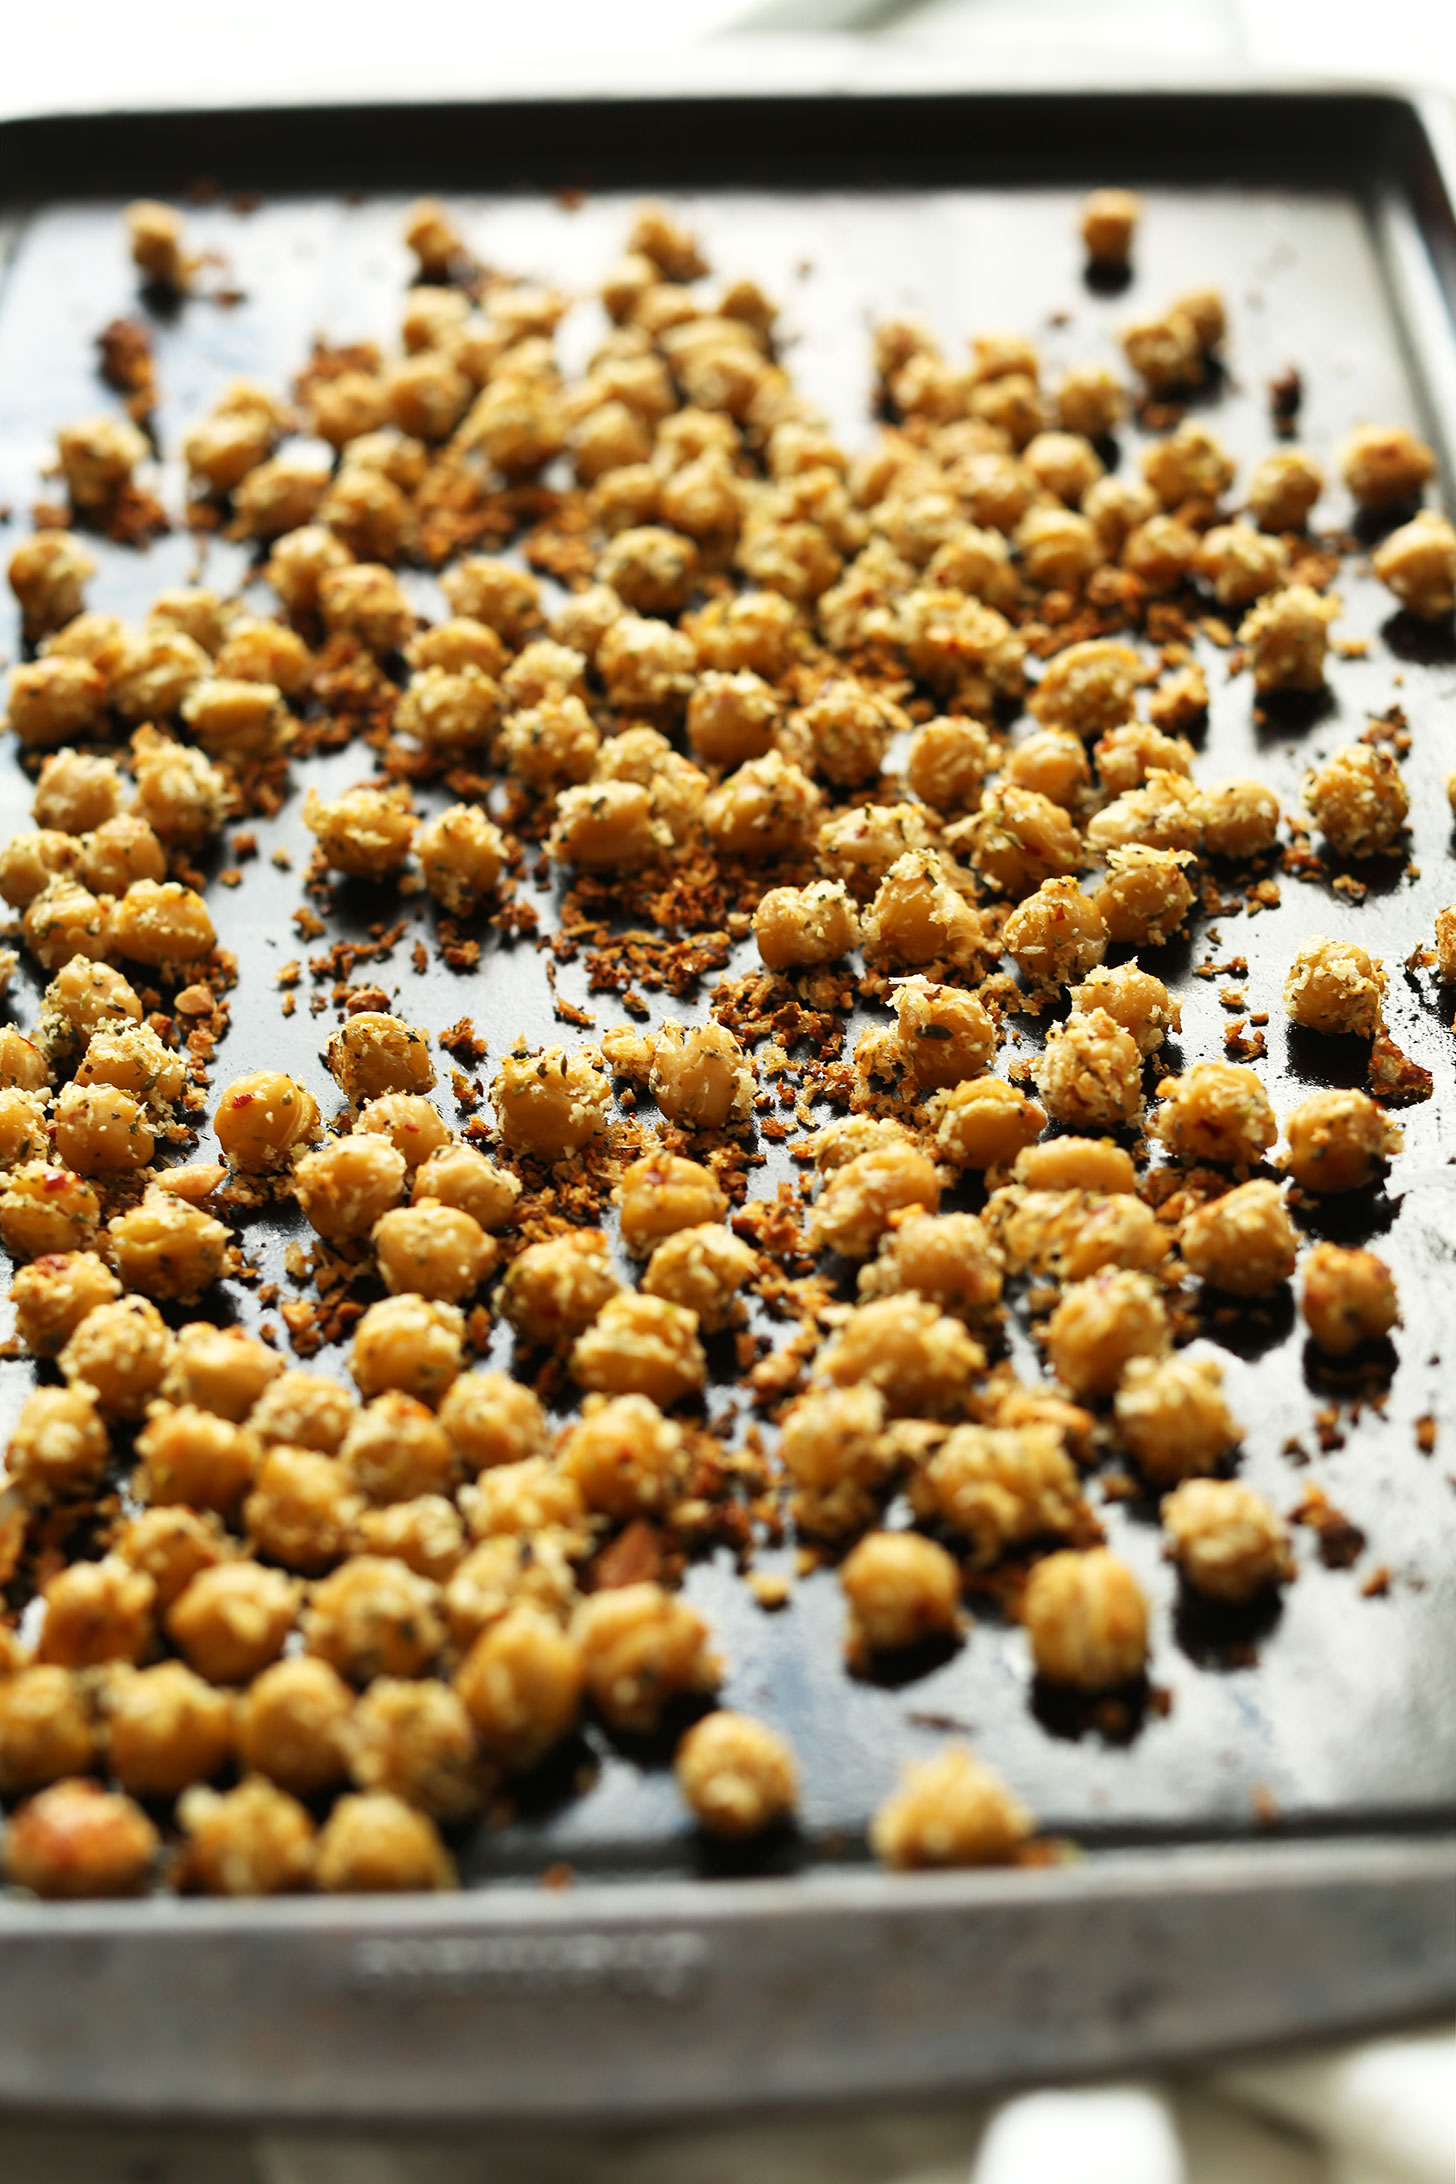 Baking sheet with freshly roasted chickpeas and spices for making a healthy plant-based dinner